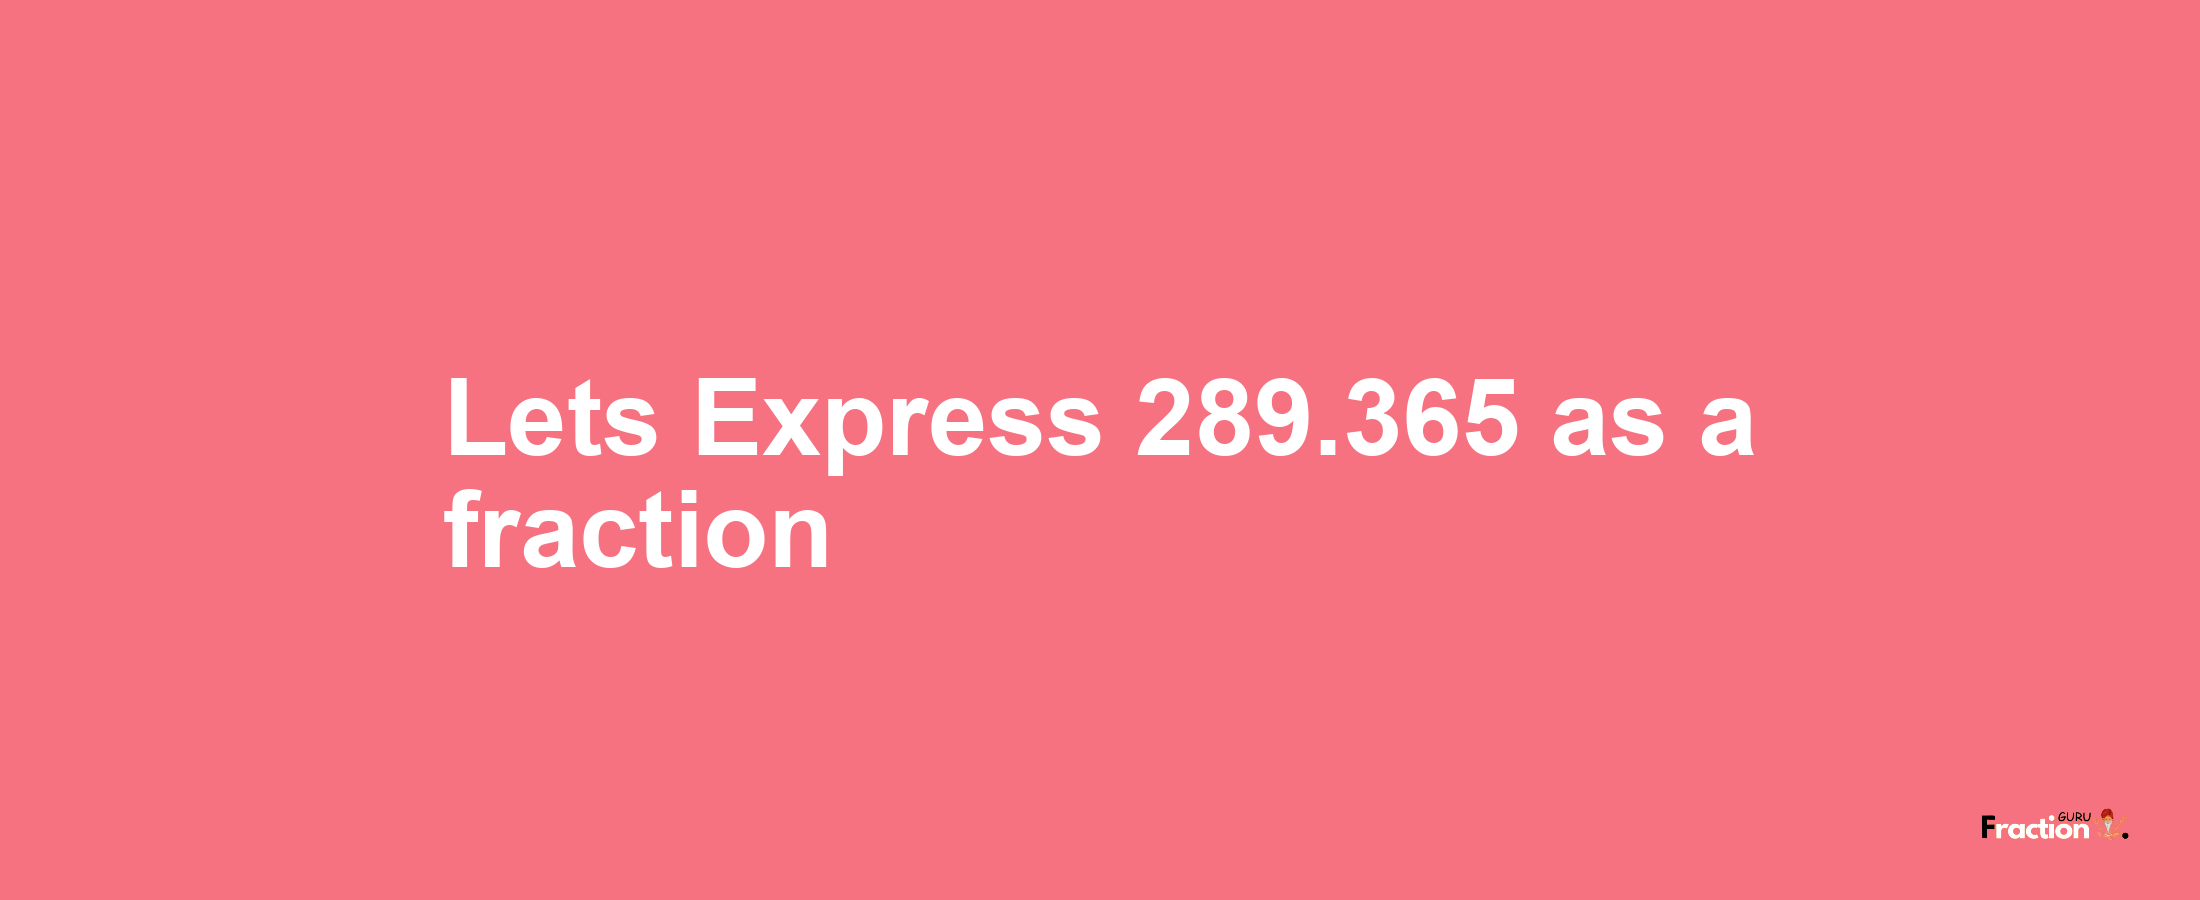 Lets Express 289.365 as afraction